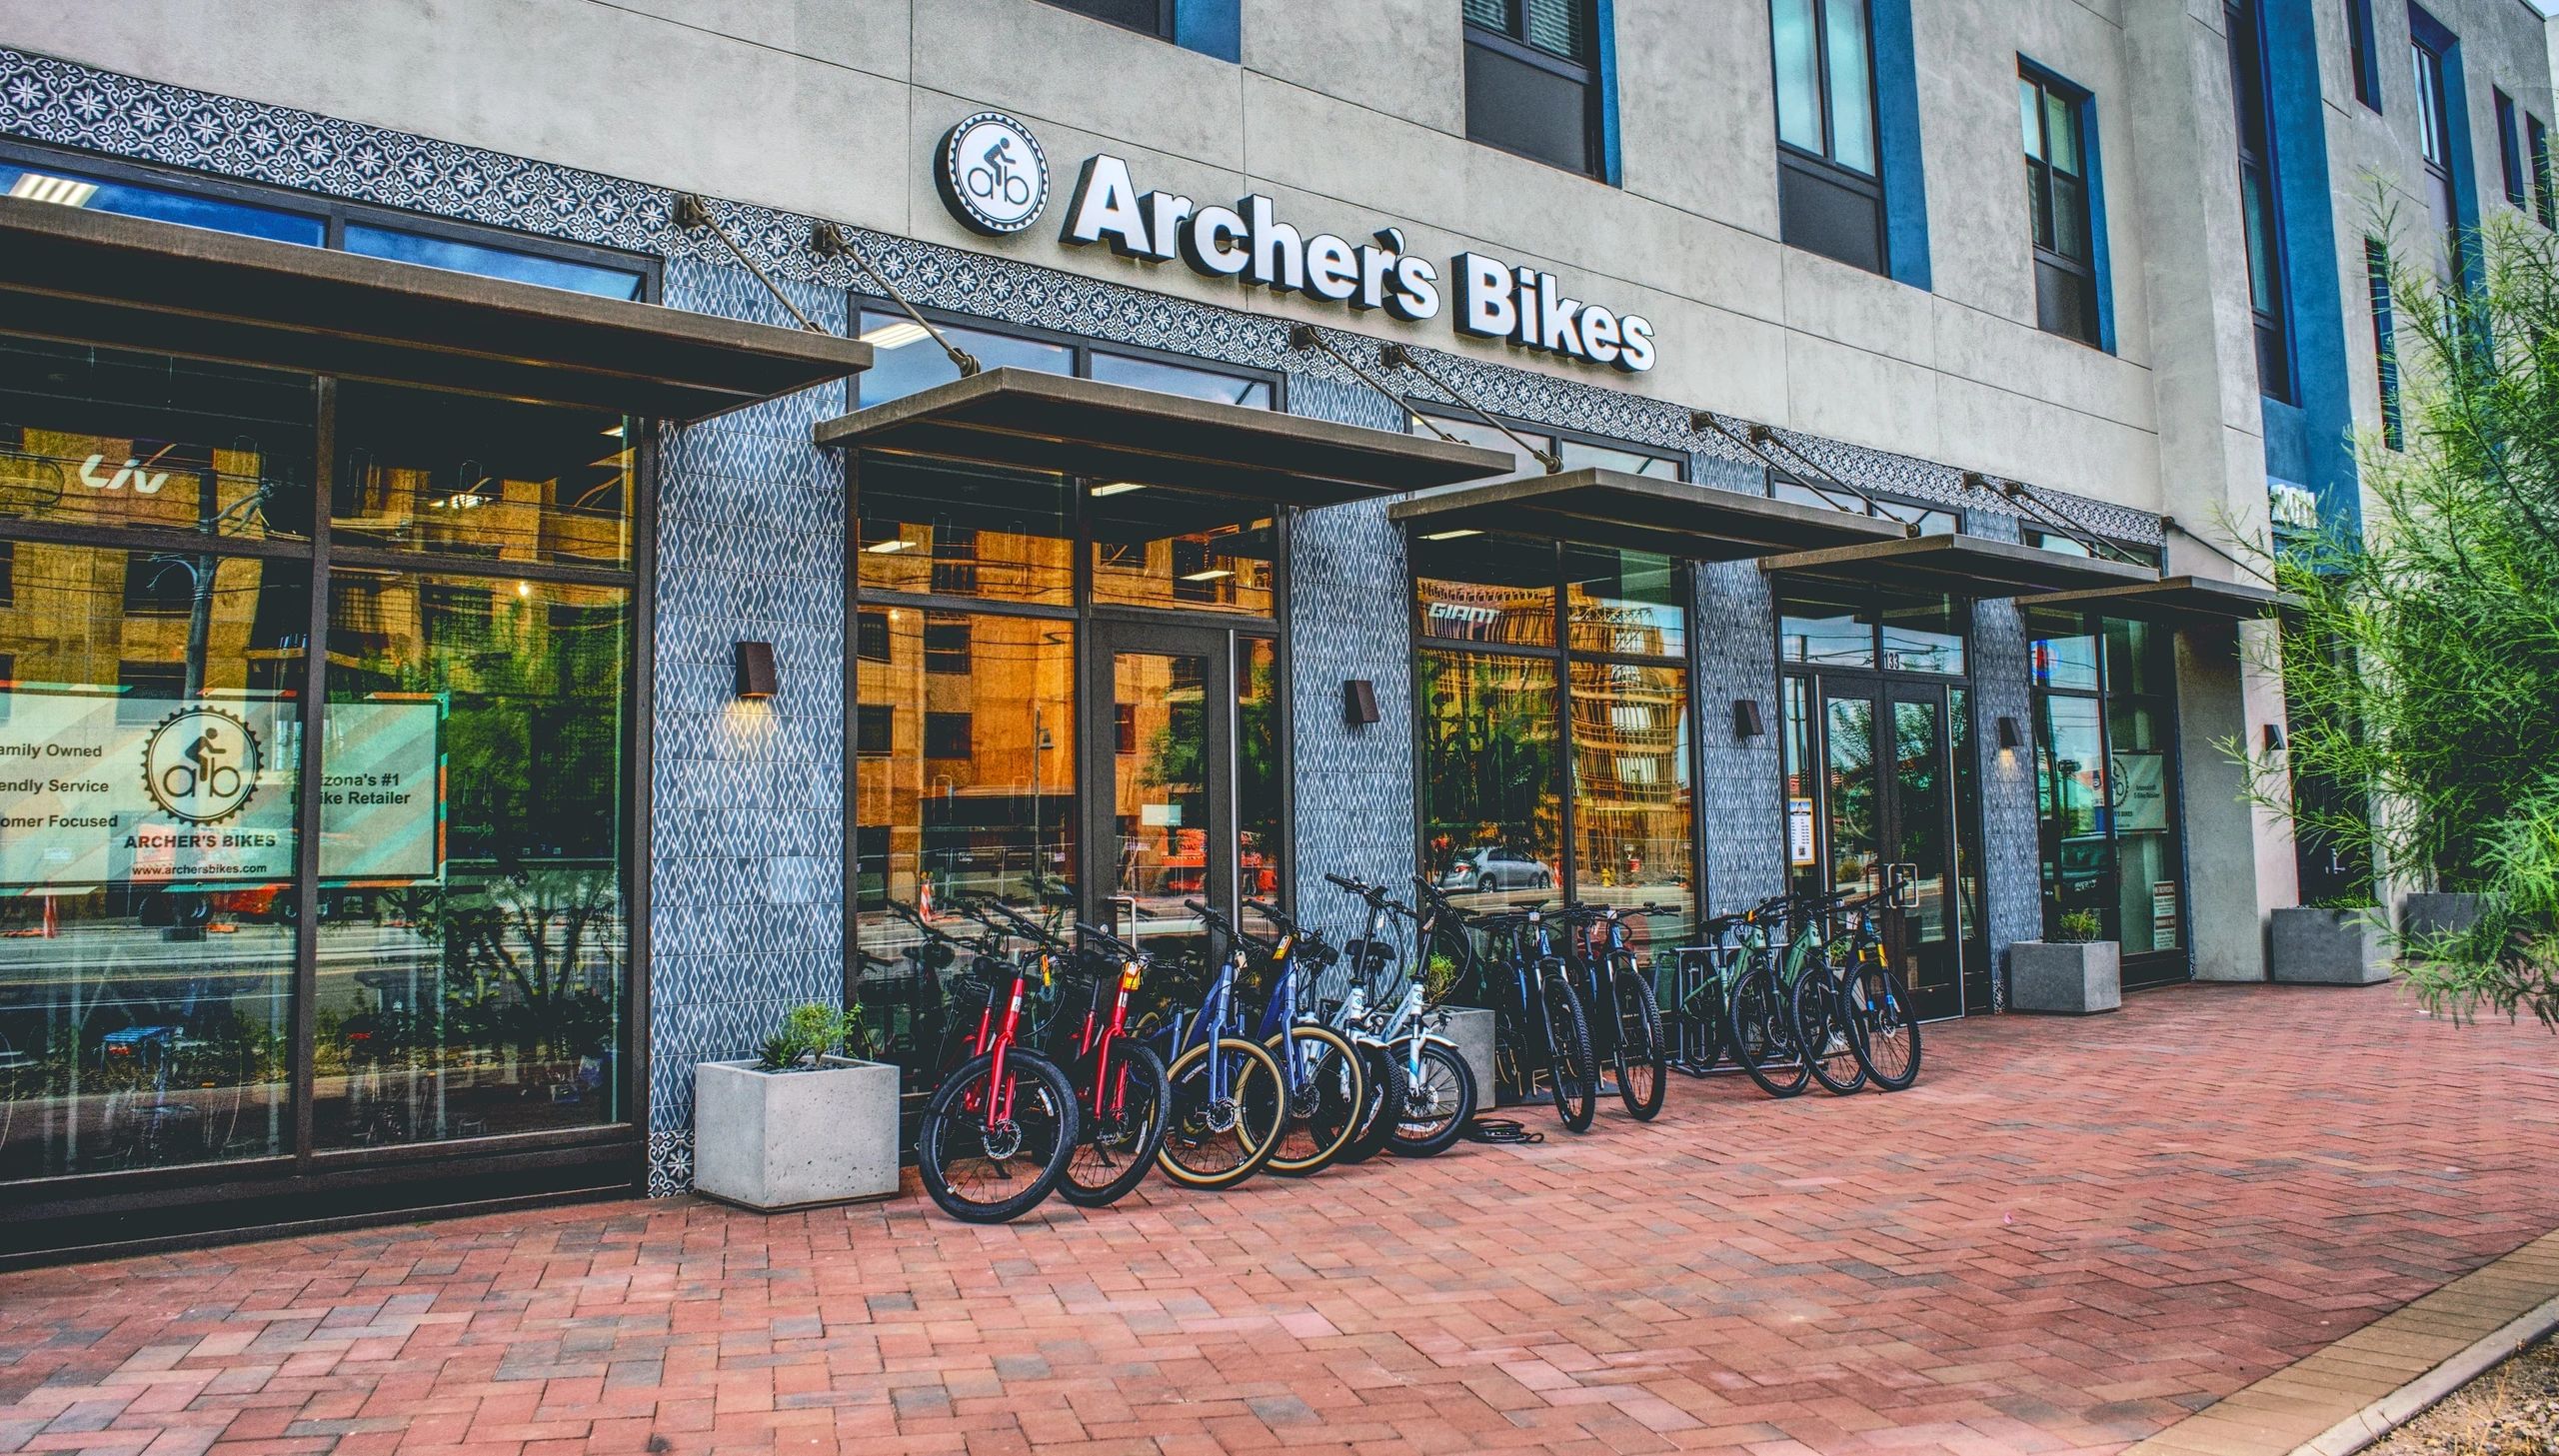 Archers Bikes Tempe - Your Trusted Bicycle Shop